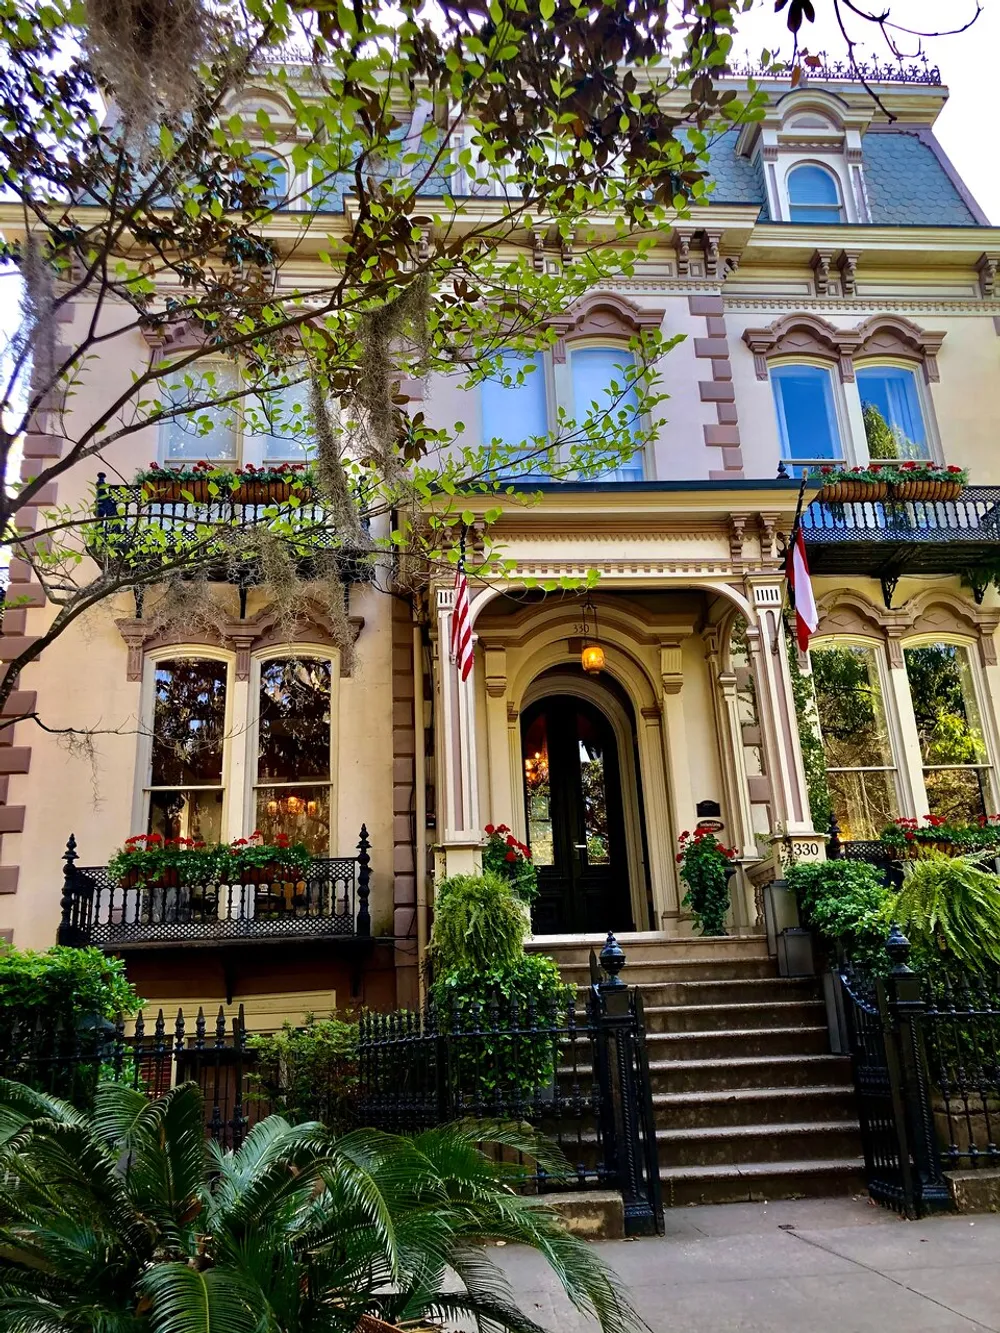 The image shows a charming multistory Victorian house with intricate ironwork on the balconies vibrant flowerboxes and an American flag nestled among greenery and mature trees